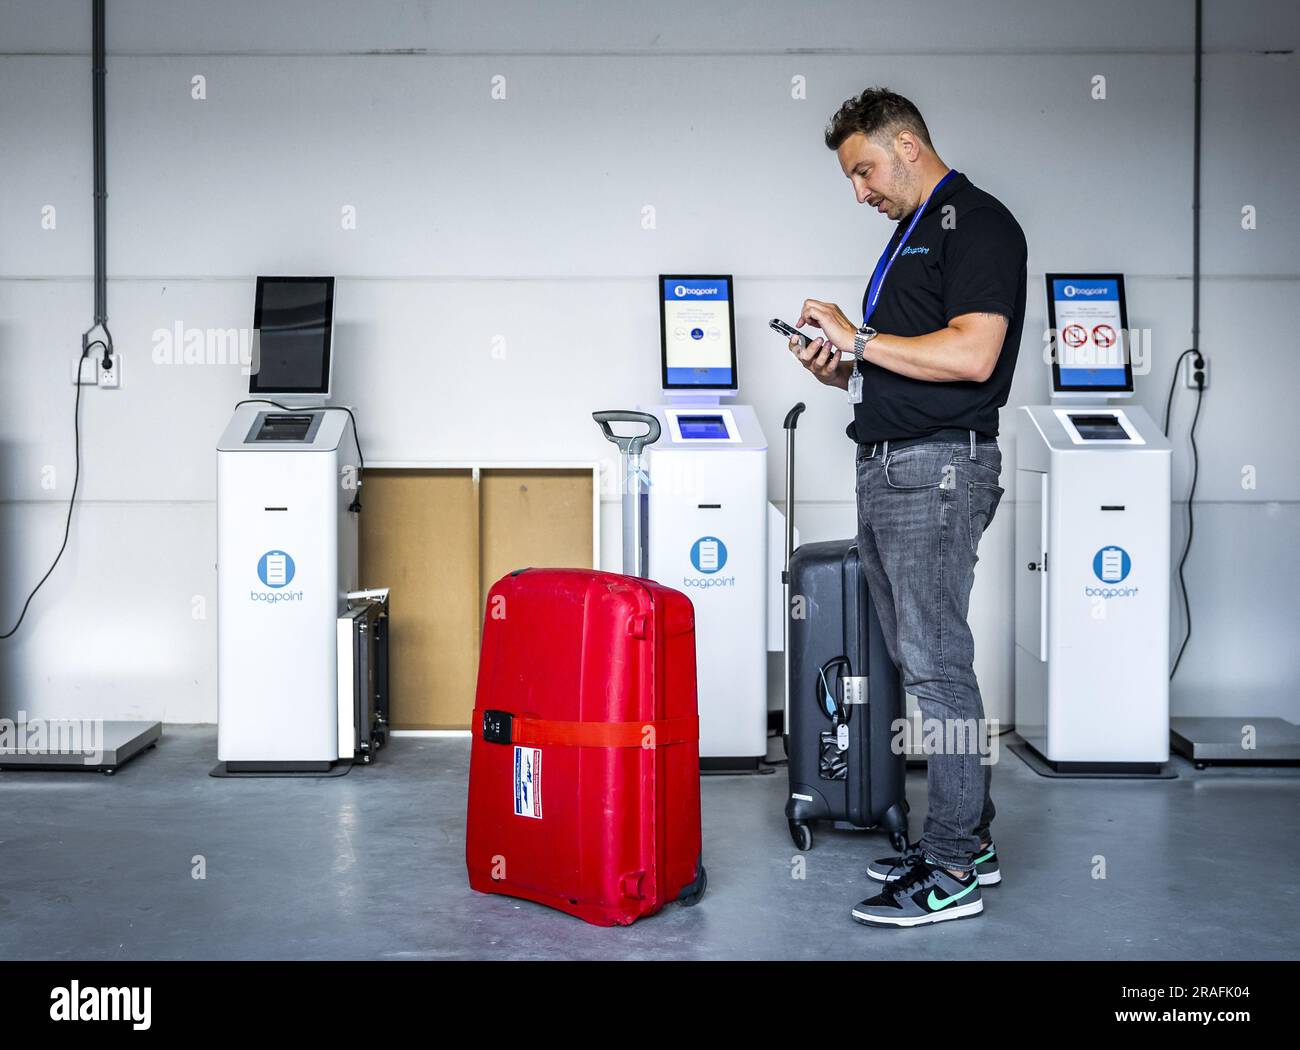 AALSMEER - Collected baggage is processed by a baggage collection service  for travelers flying at Schiphol. With the service, travelers do not have  to check in their luggage themselves and thus avoid